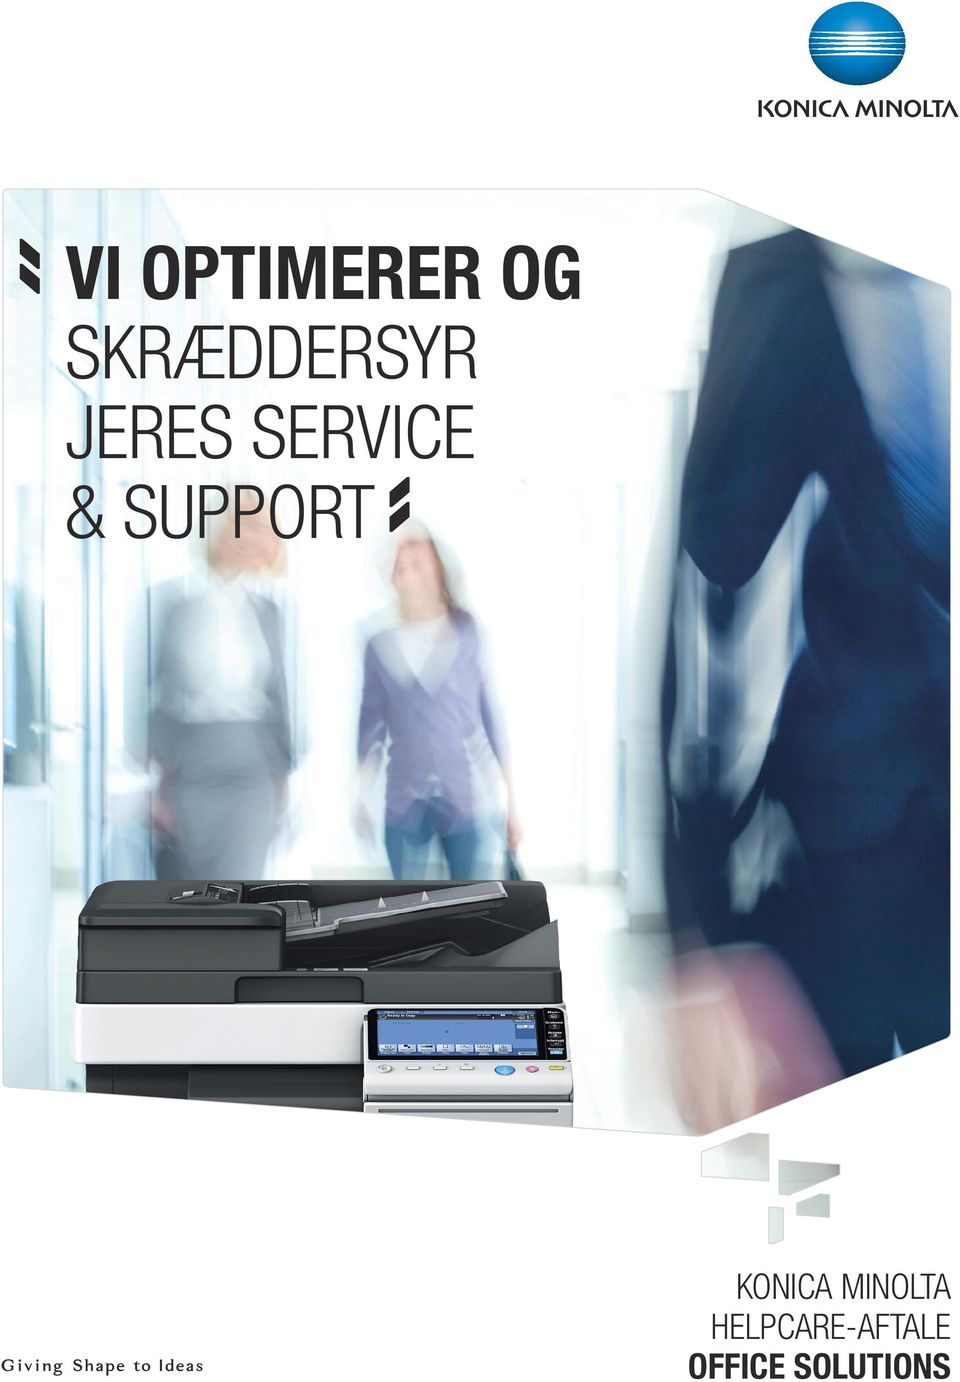 SERVICE & SUPPORT KONICA